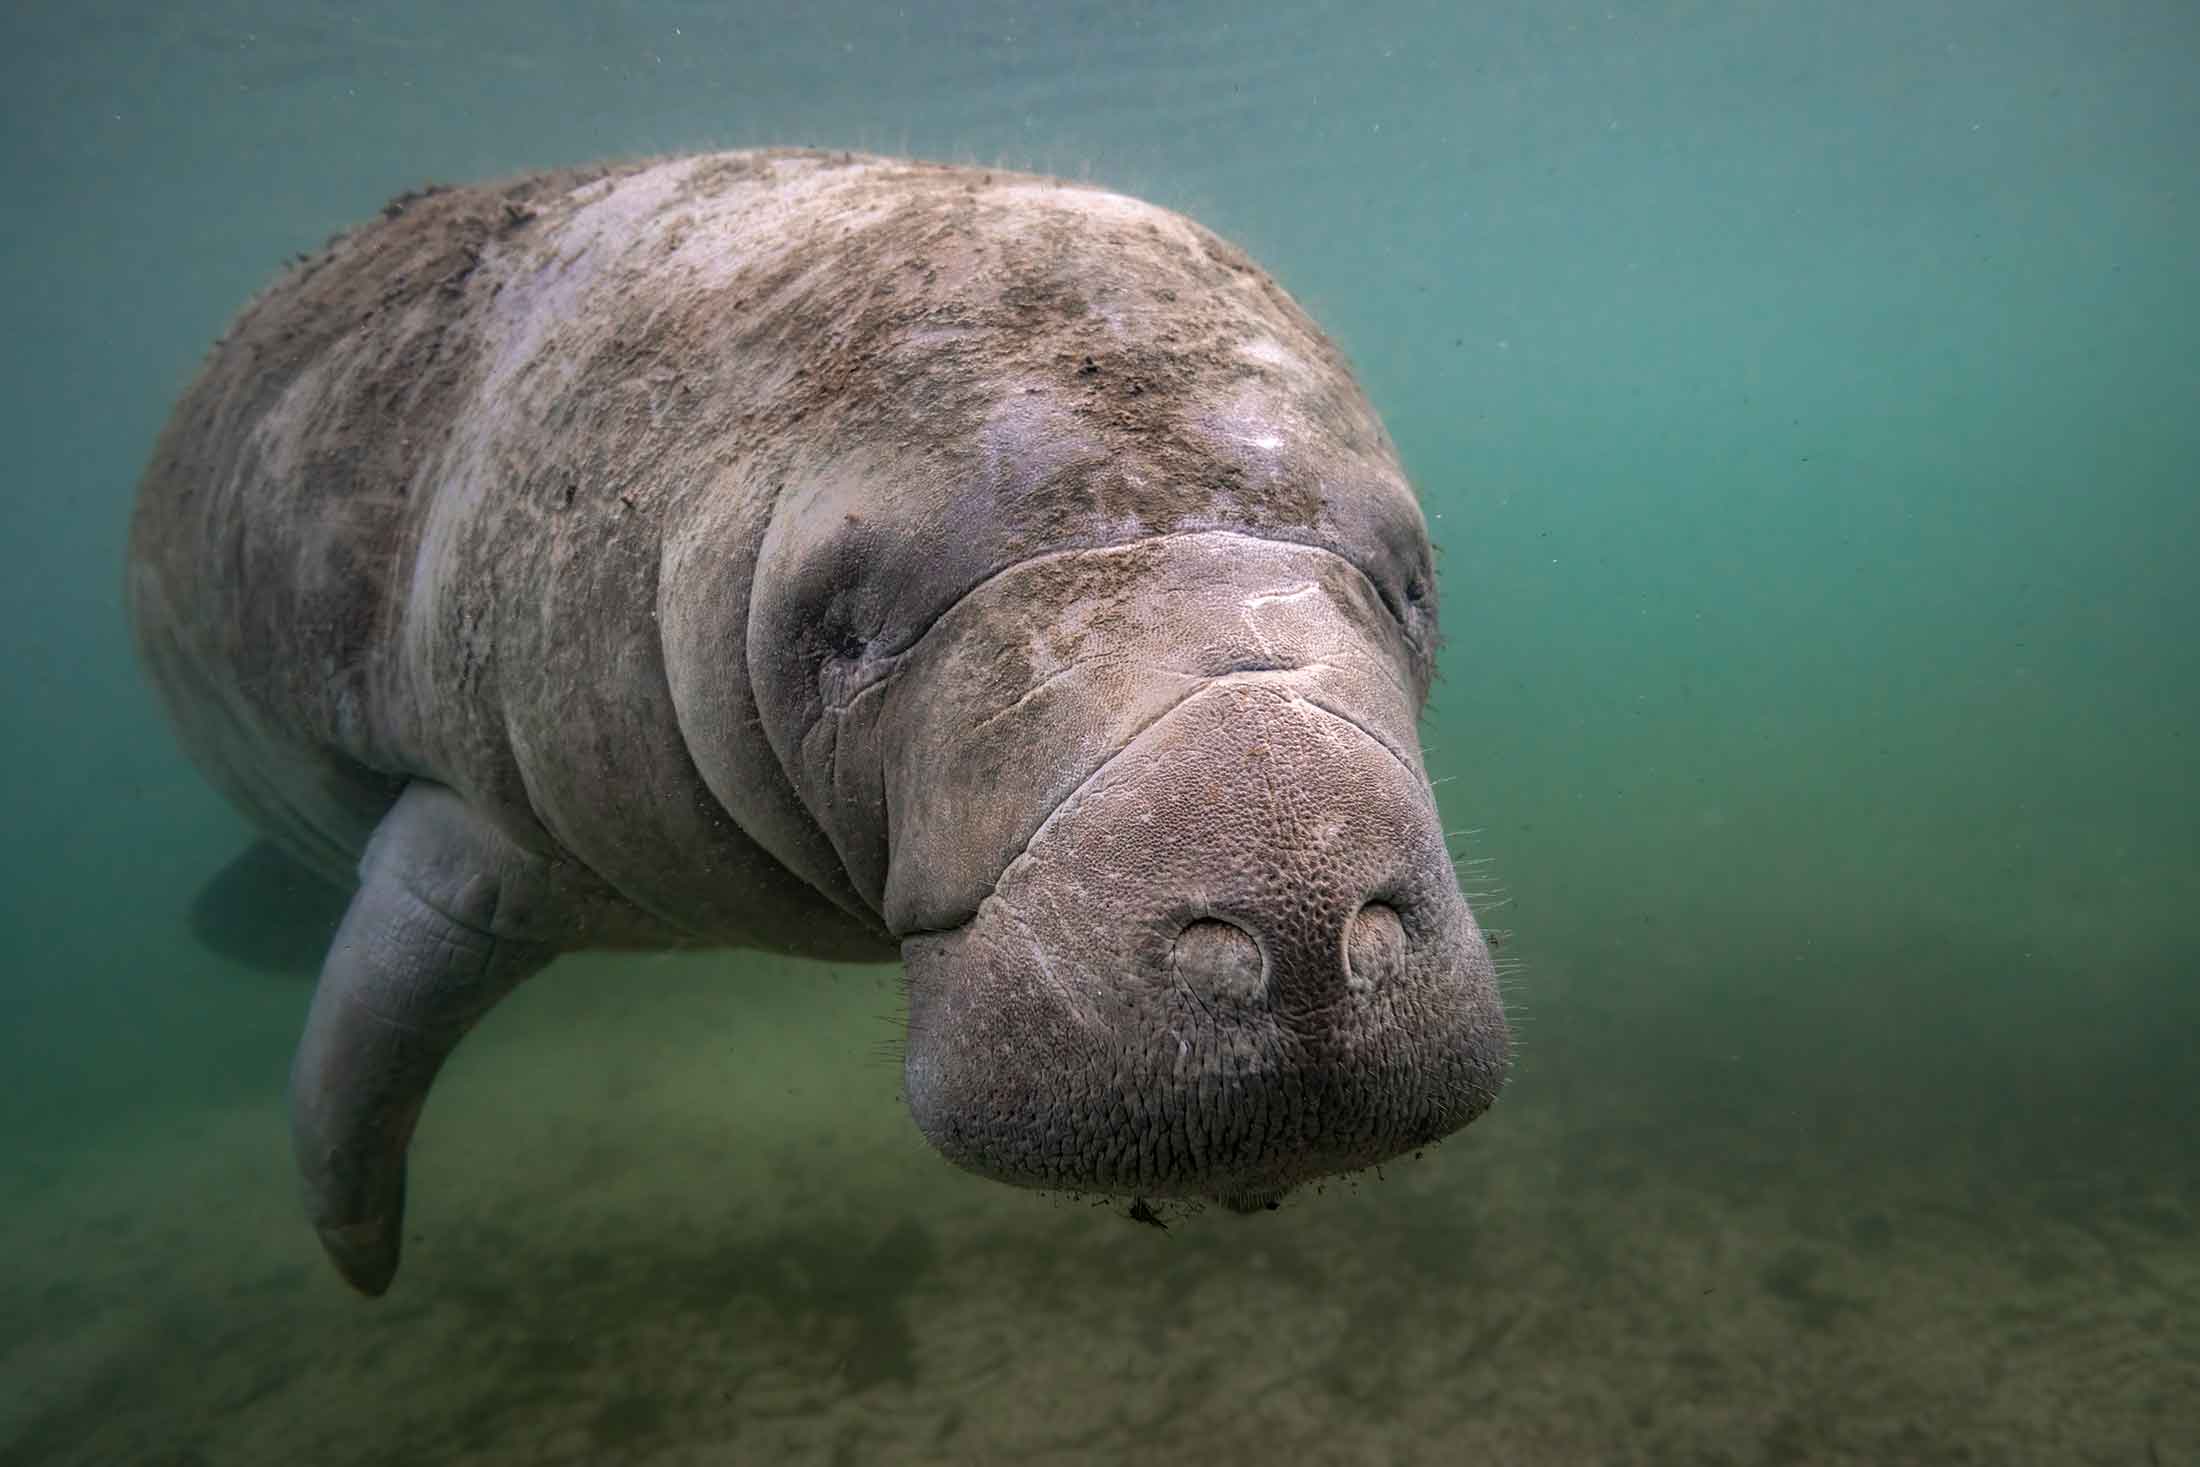 manatee swimming toward the camera in shallow water with the sandy bottom visible